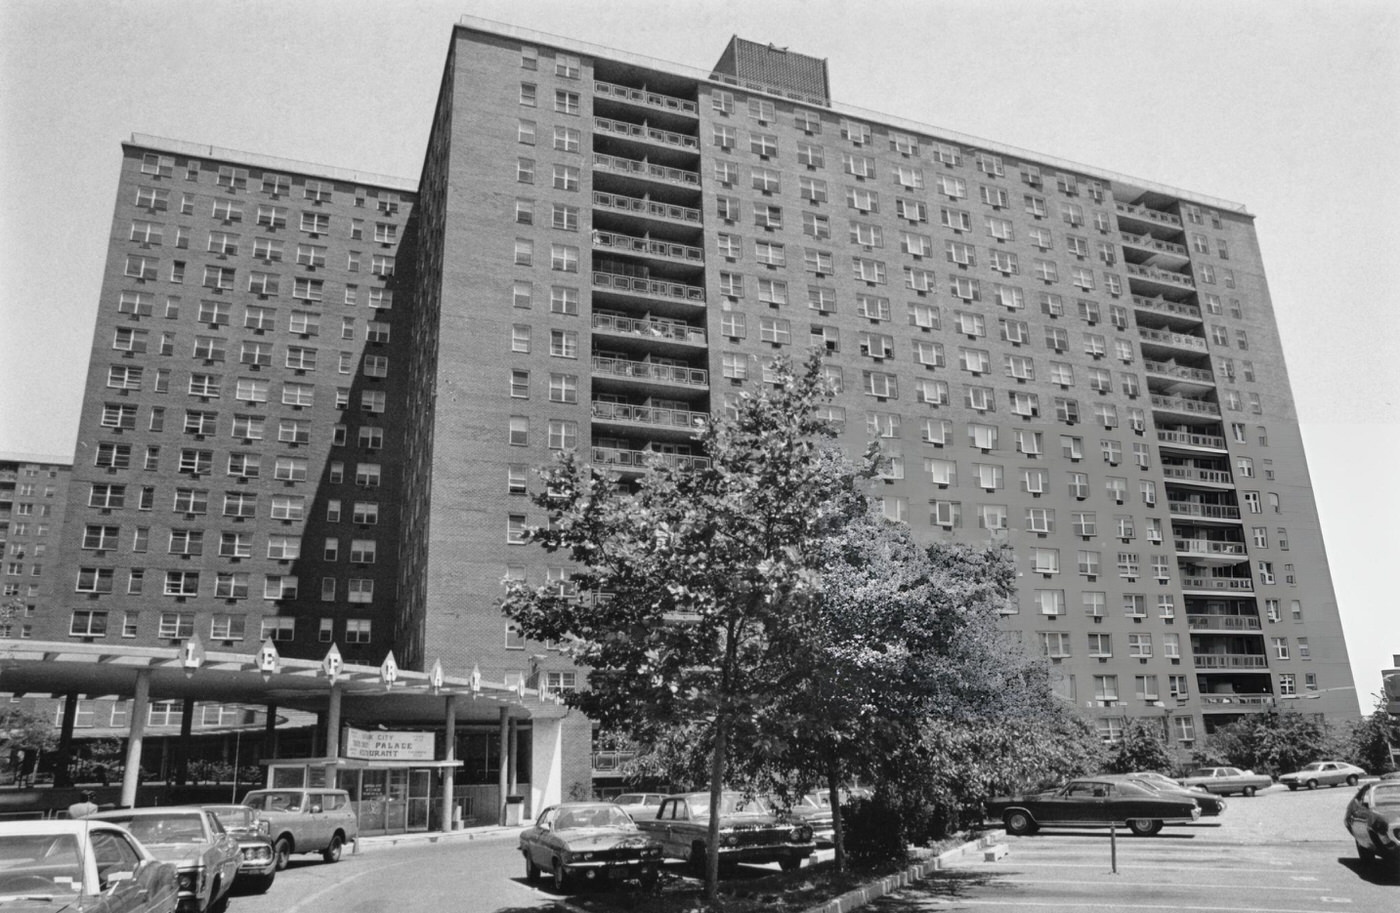 Cars Parked In The Lot In Front Of Lefrak City, An Apartment Block In Queens, 1970S.